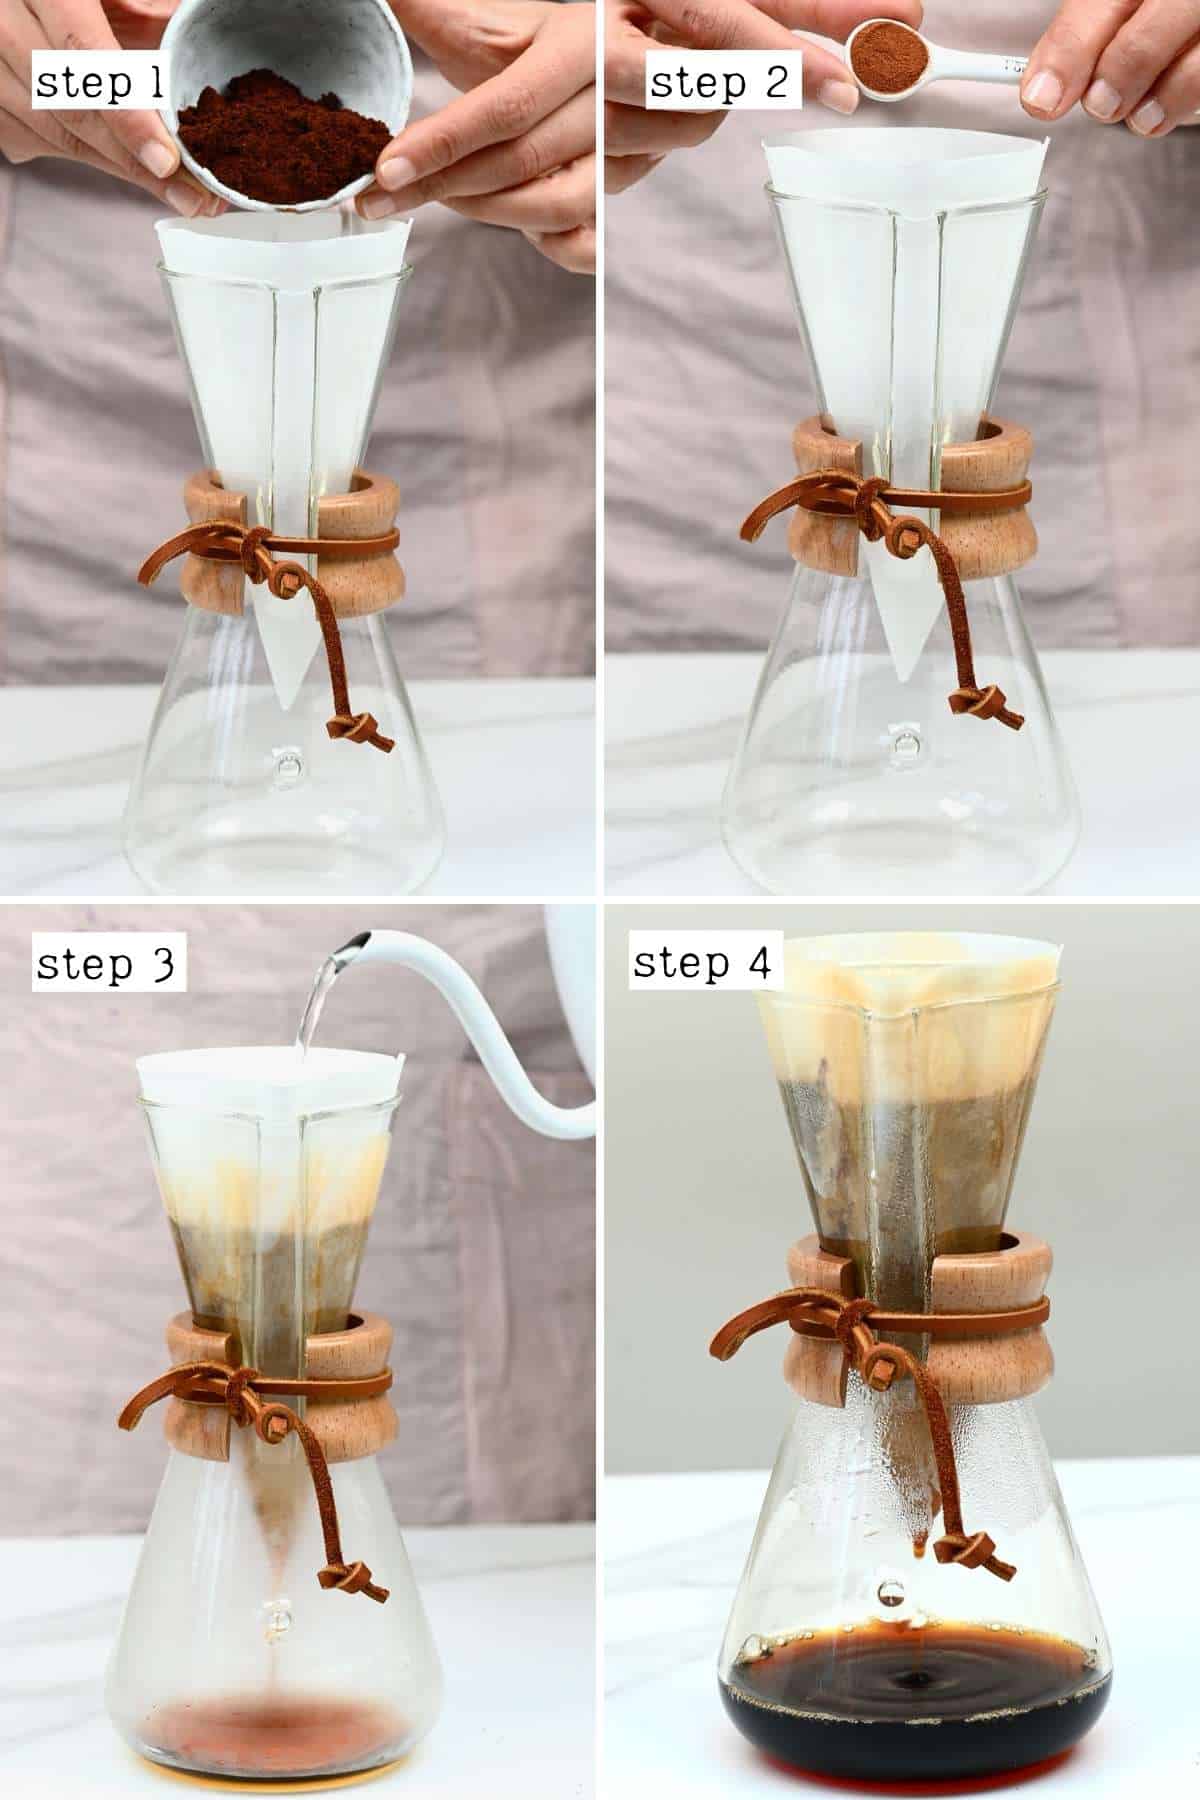 Steps for making coffee